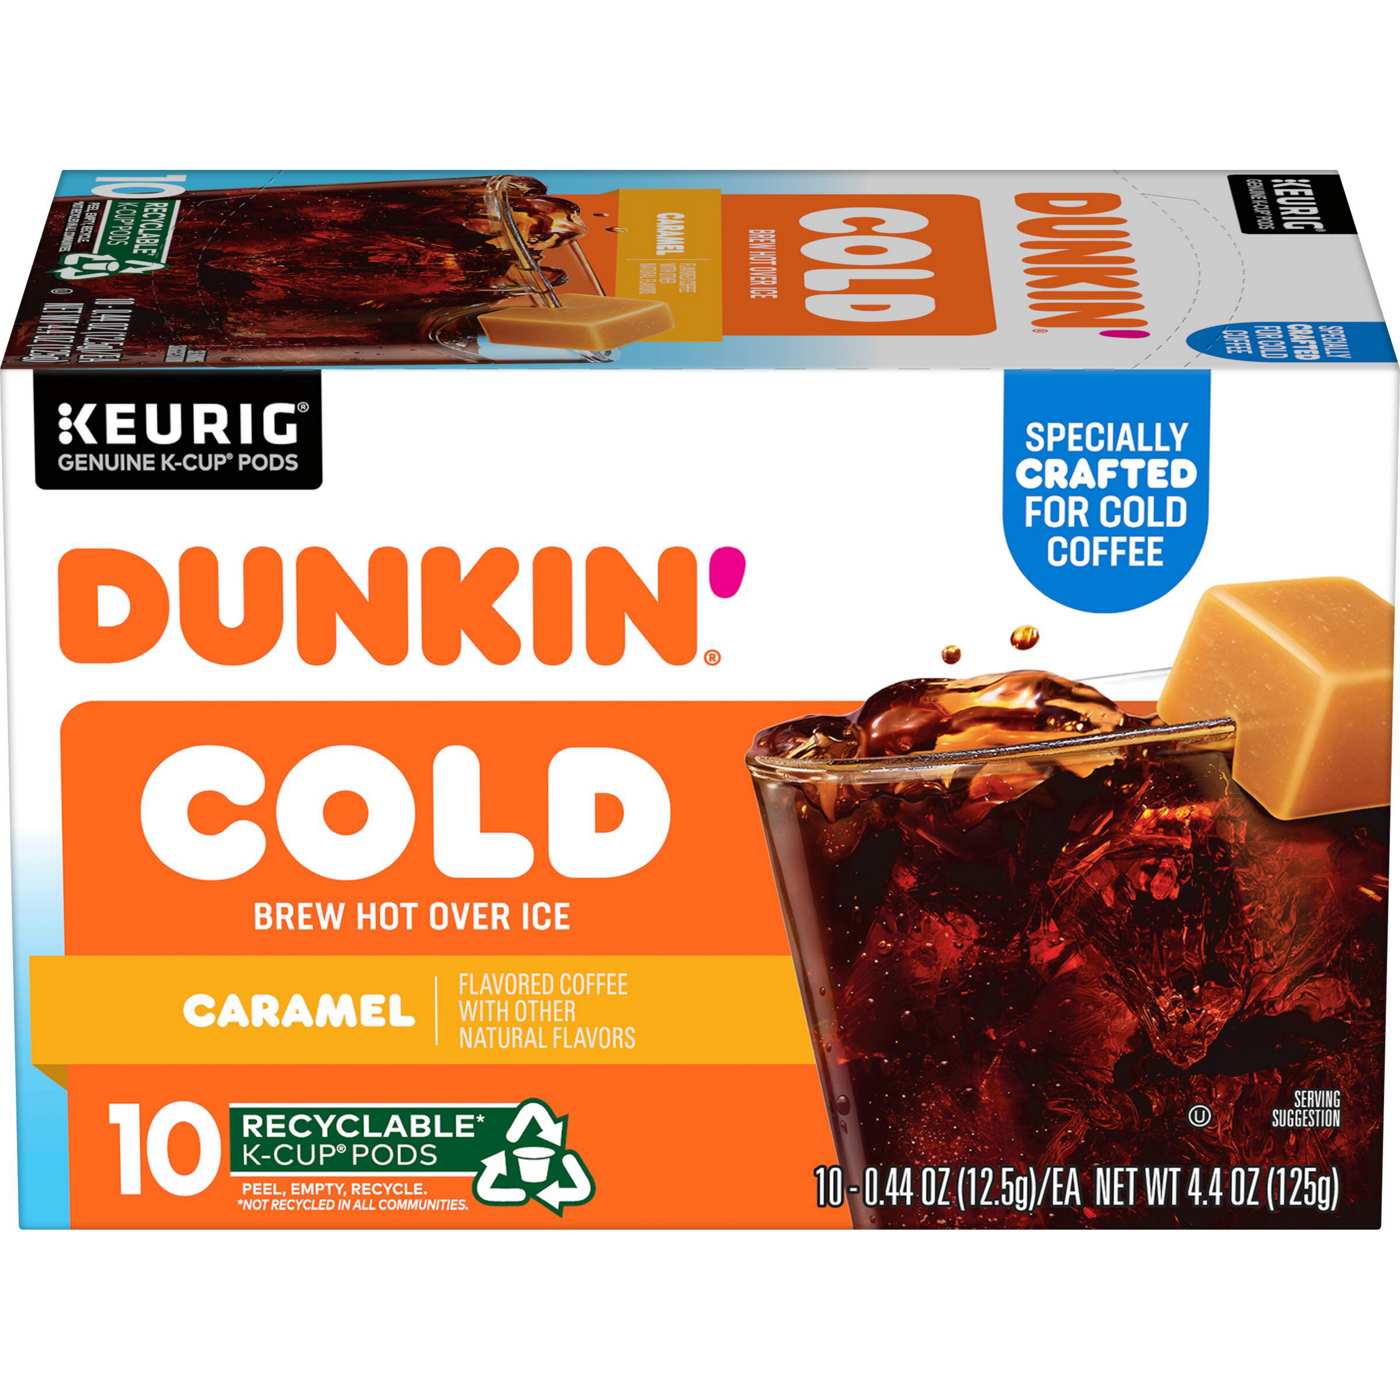 Dunkin' Donuts Cold Brew Caramel Single Serve Coffee K Cups; image 1 of 4